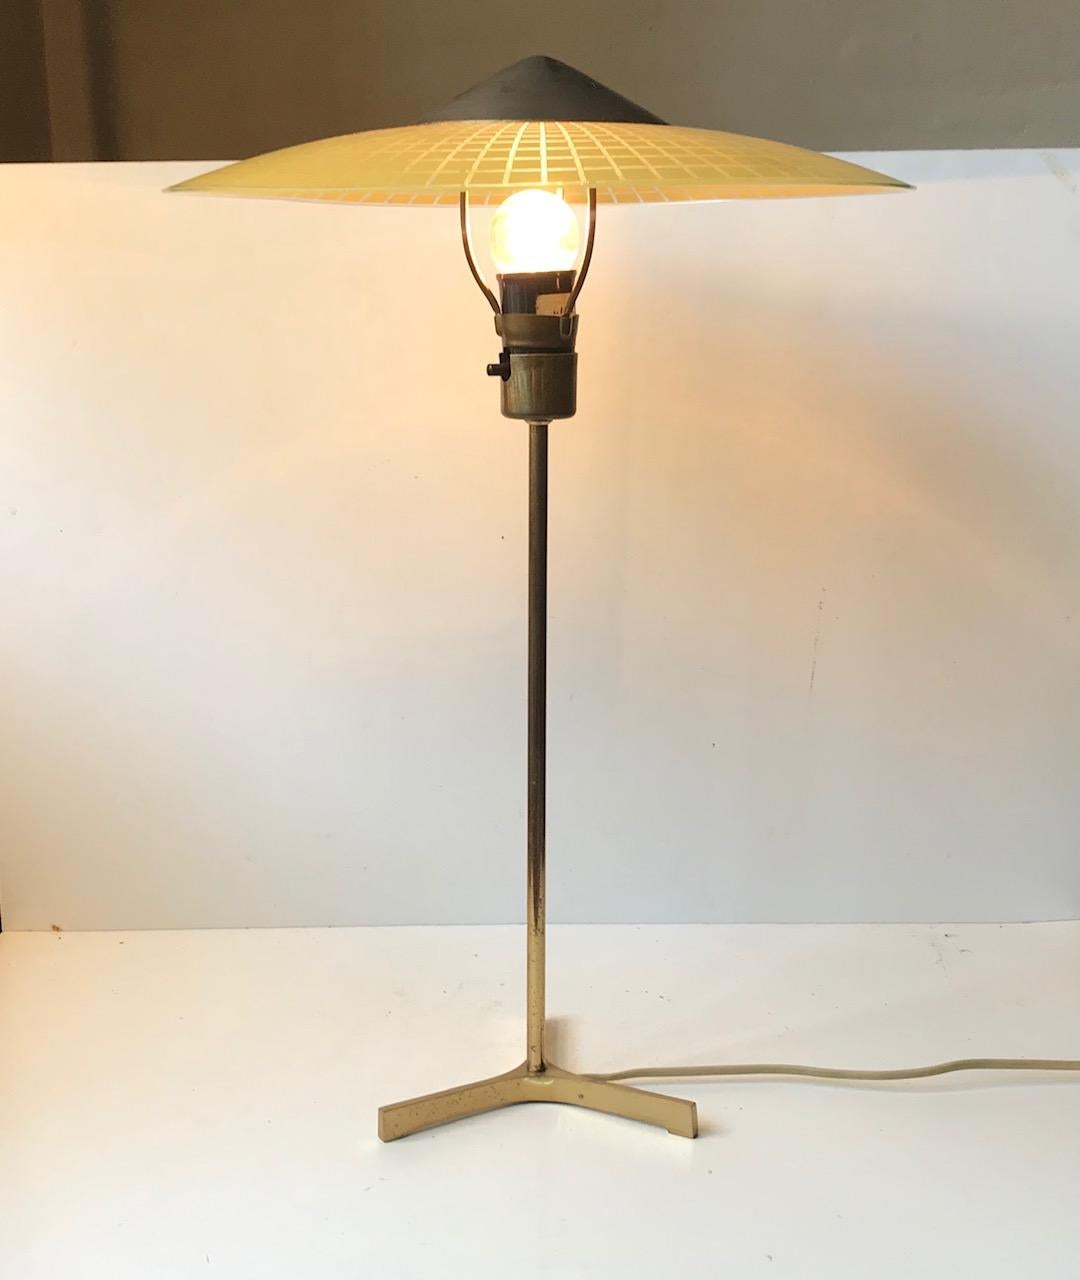 European Vintage Tripod Table Lamp in Brass and Checkered Glass, Swiss, circa 1960s For Sale